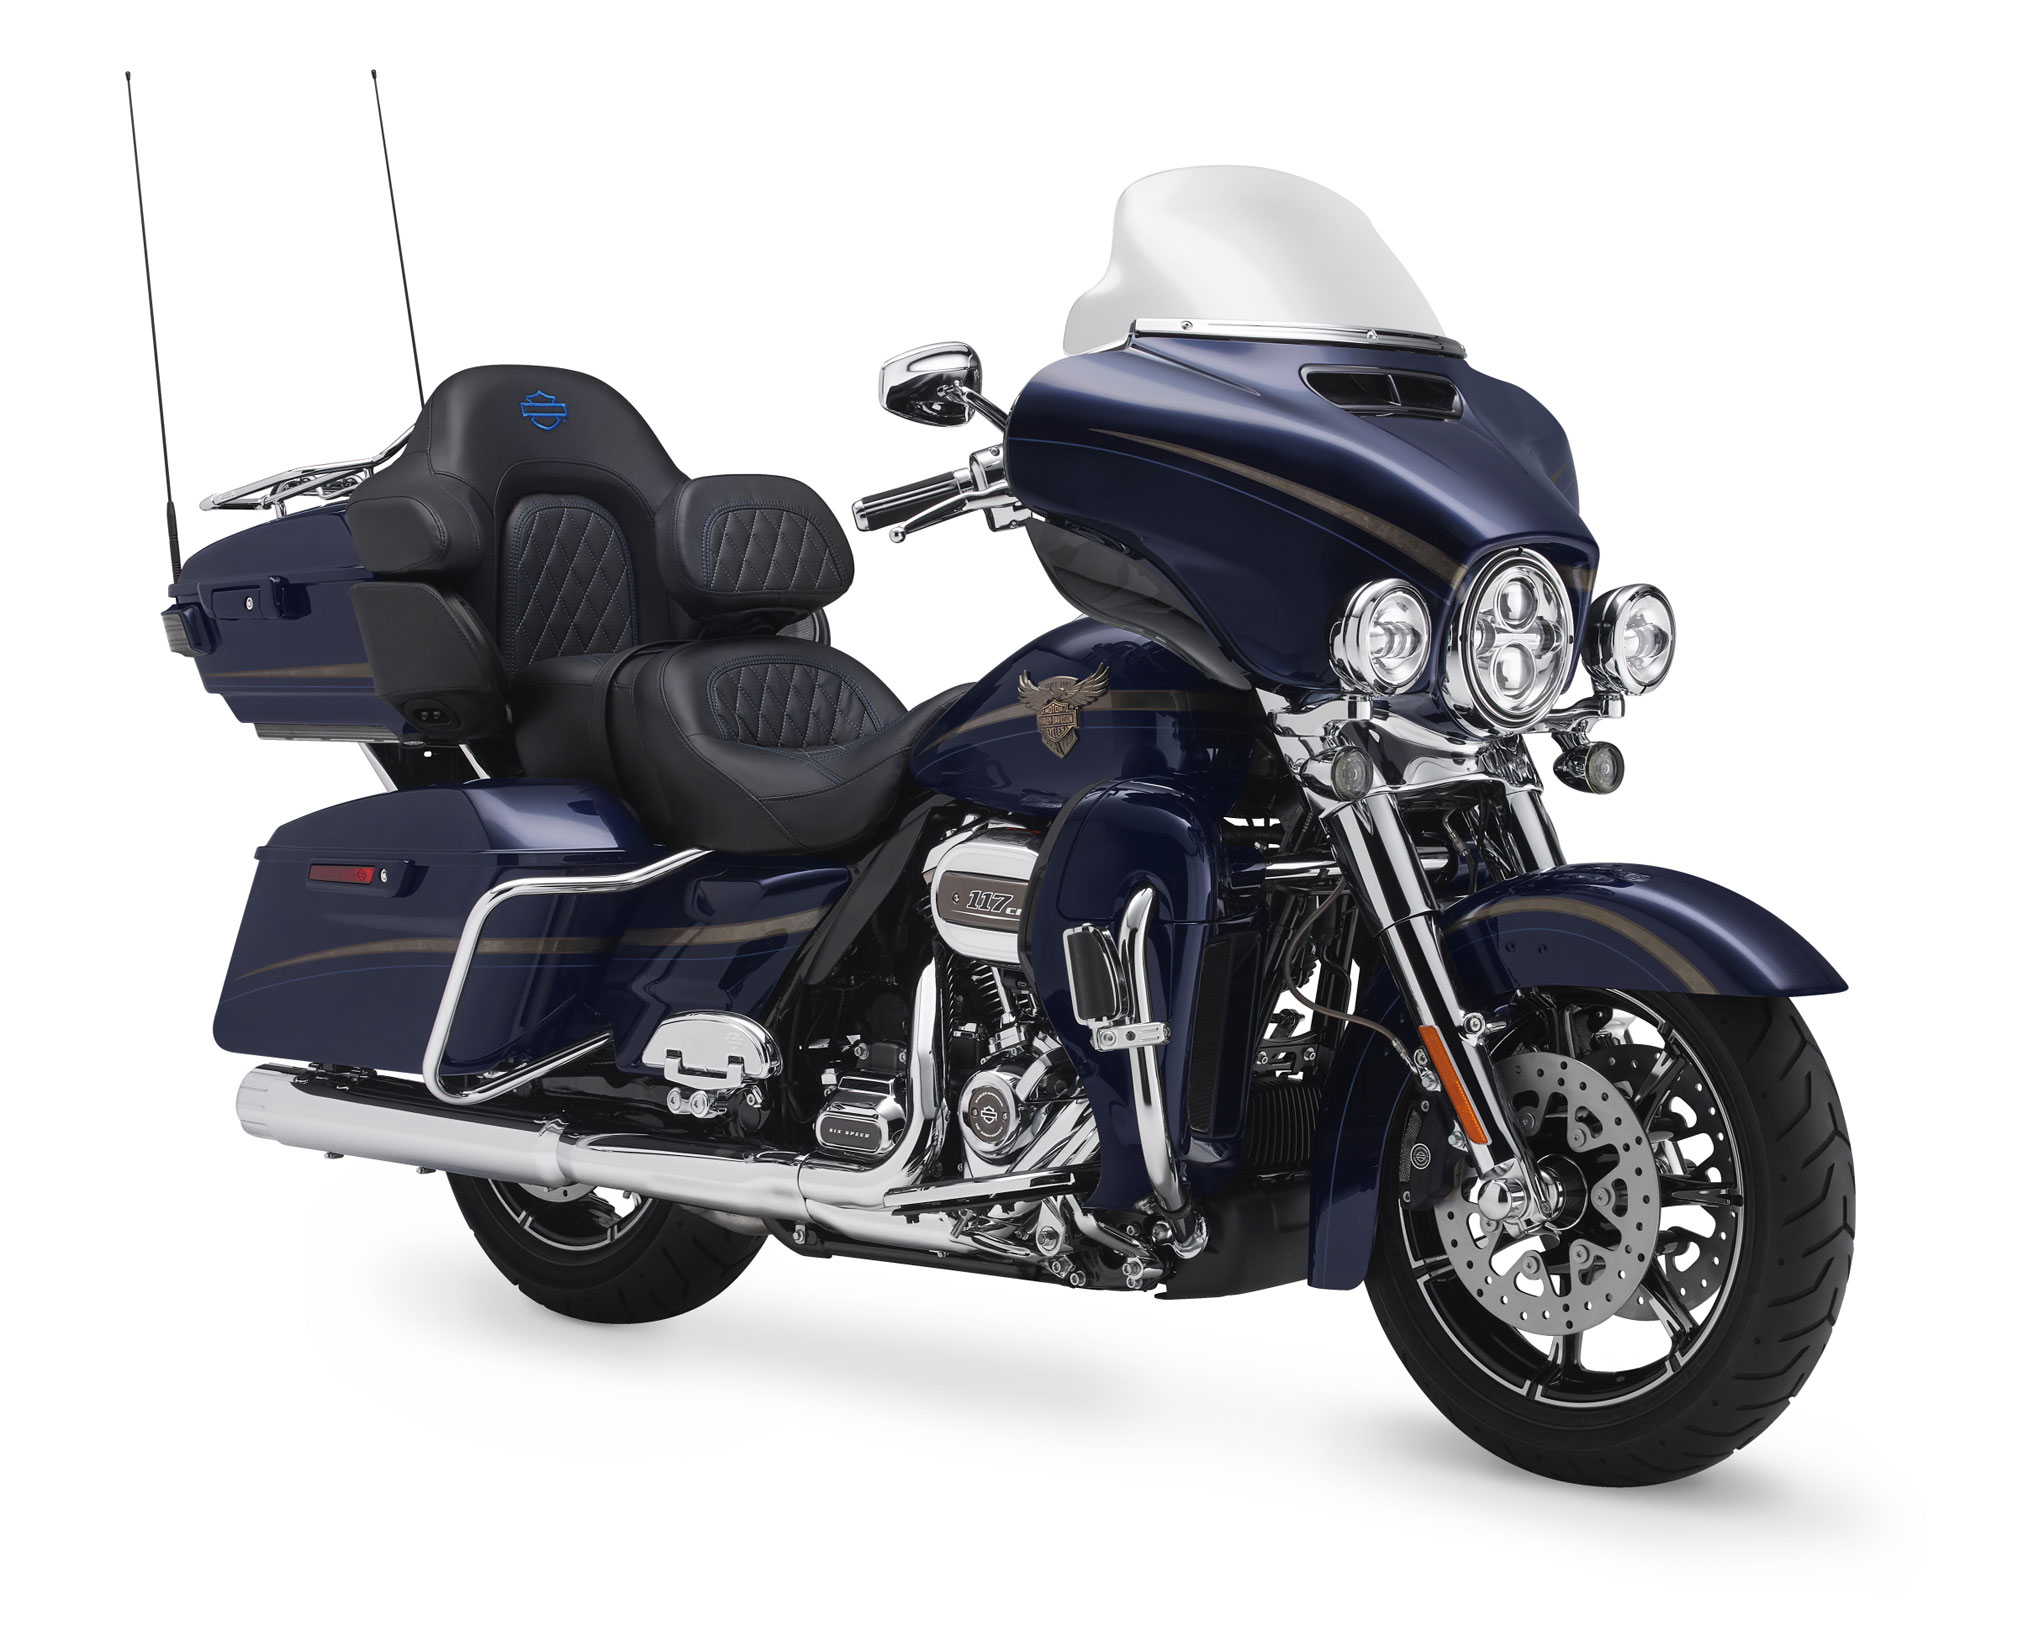 2018 Harley Davidson Cvo Limited 115th Anniversary Review Total Motorcycle